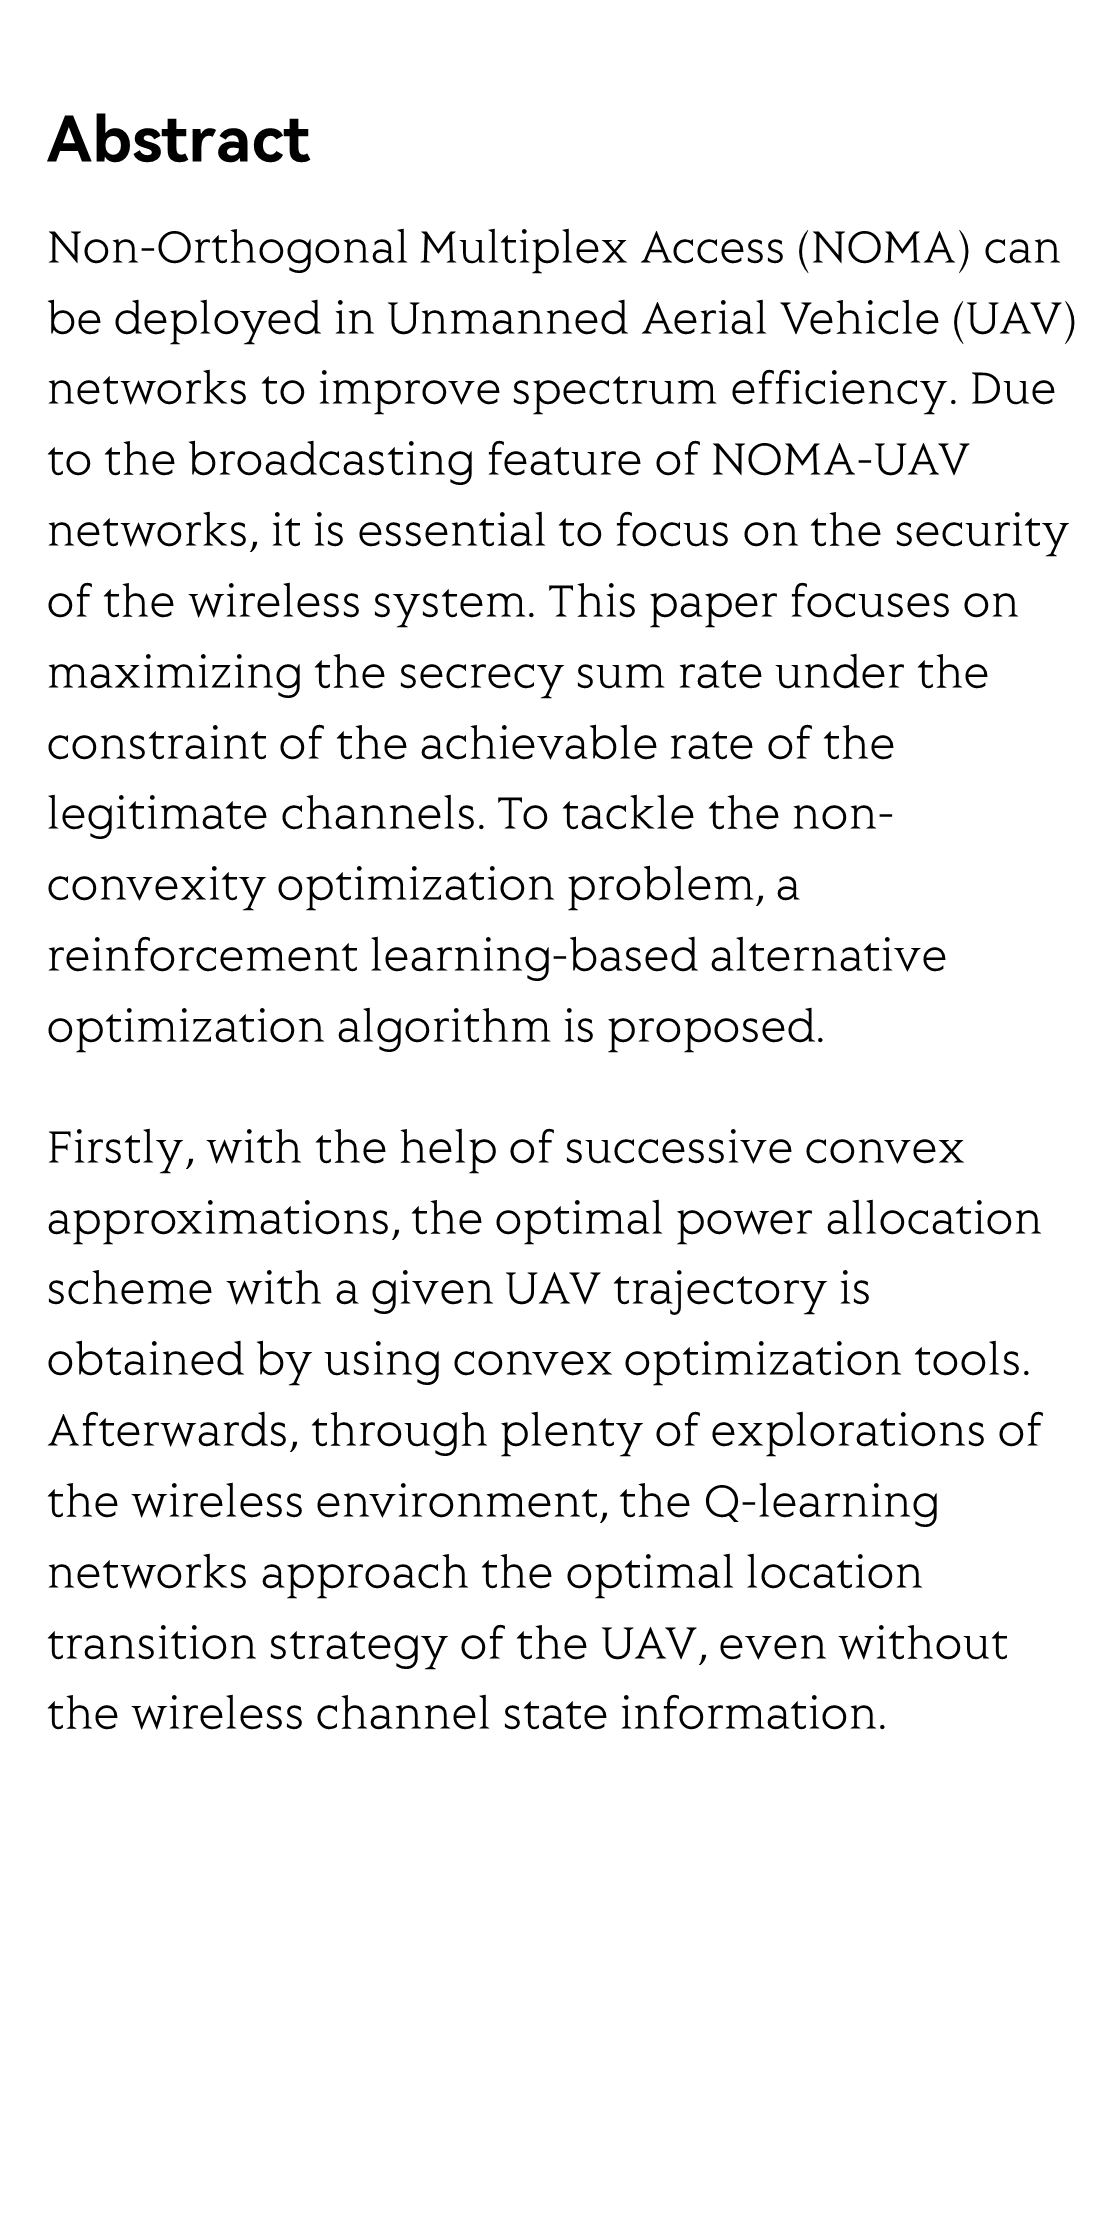 Learning-based joint UAV trajectory and power allocation optimization for secure IoT networks_2